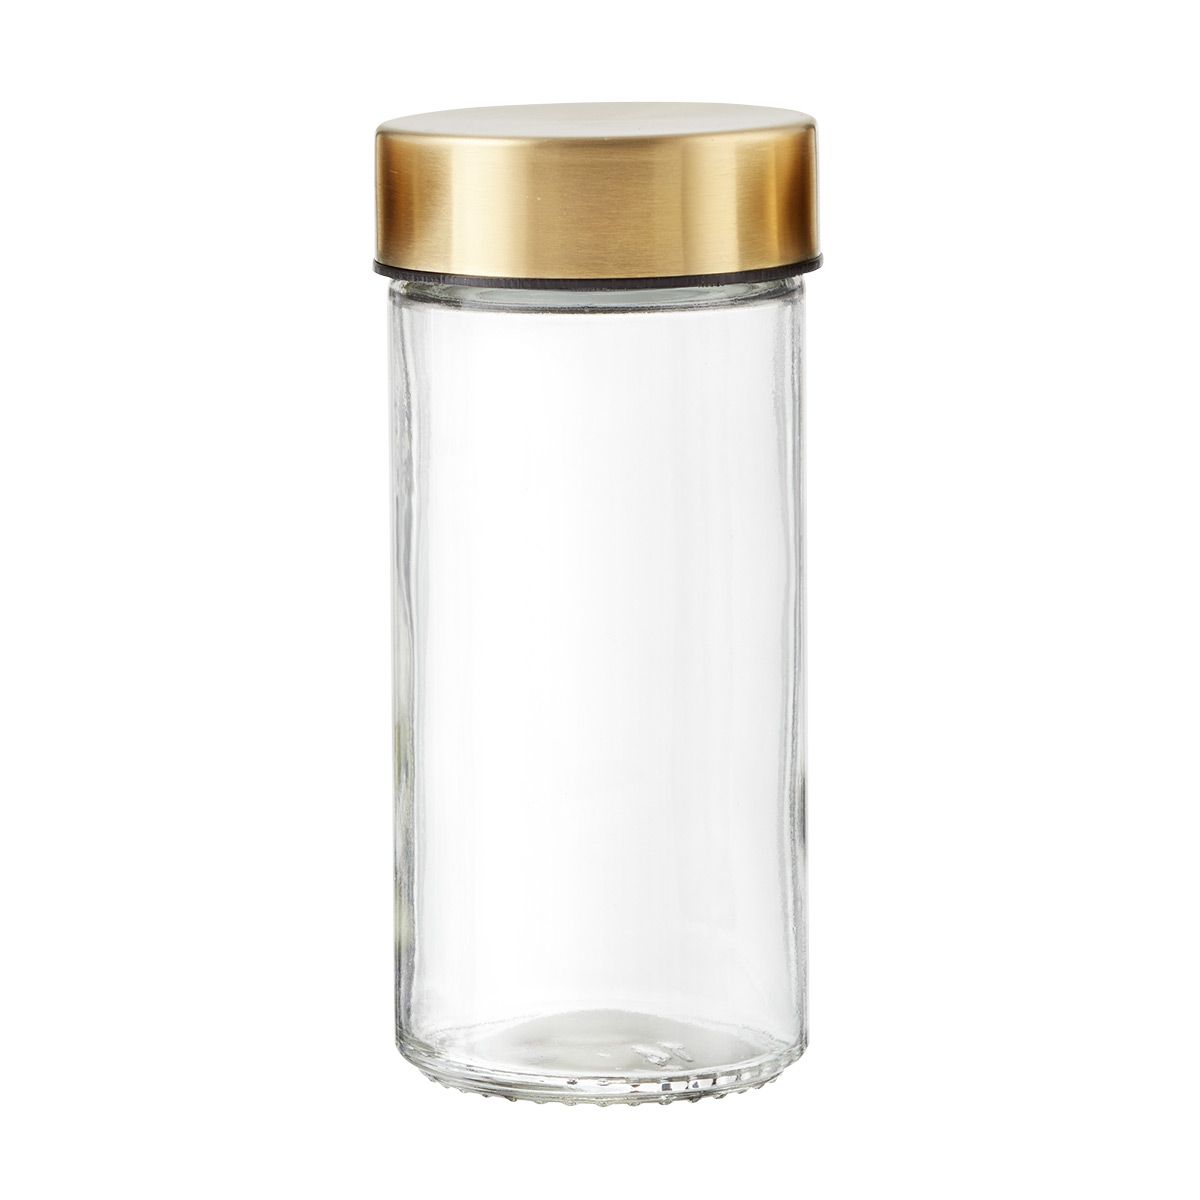 The Container Store 3 oz. Glass Spice Jar Gold | The Container Store